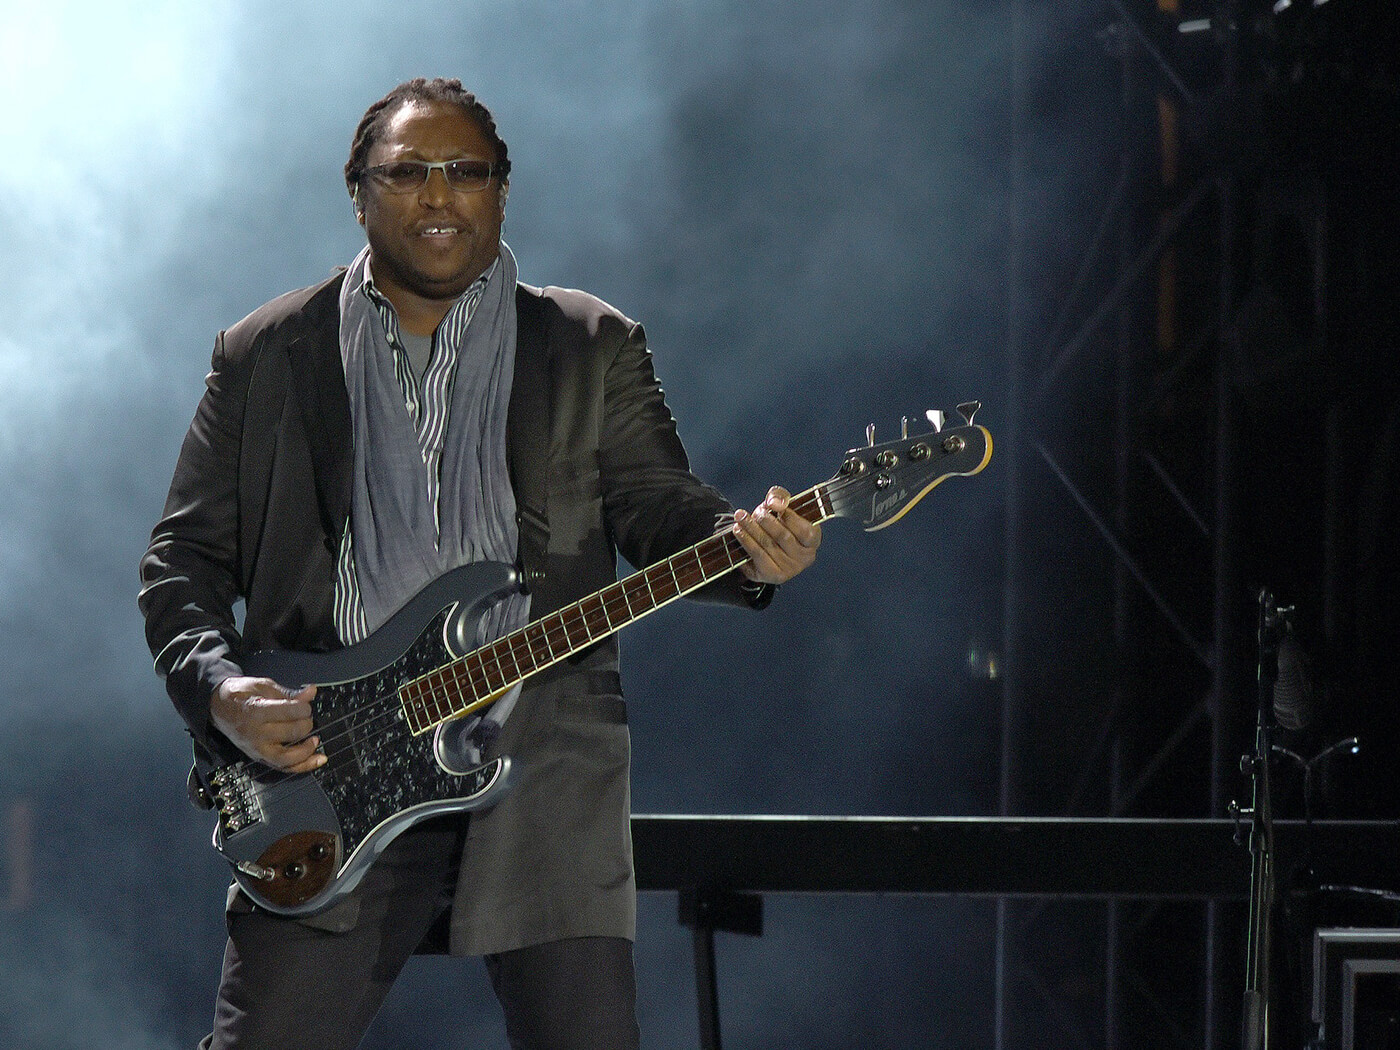 Rolling Stones bassist Darryl Jones gets his own documentary, In The Blood